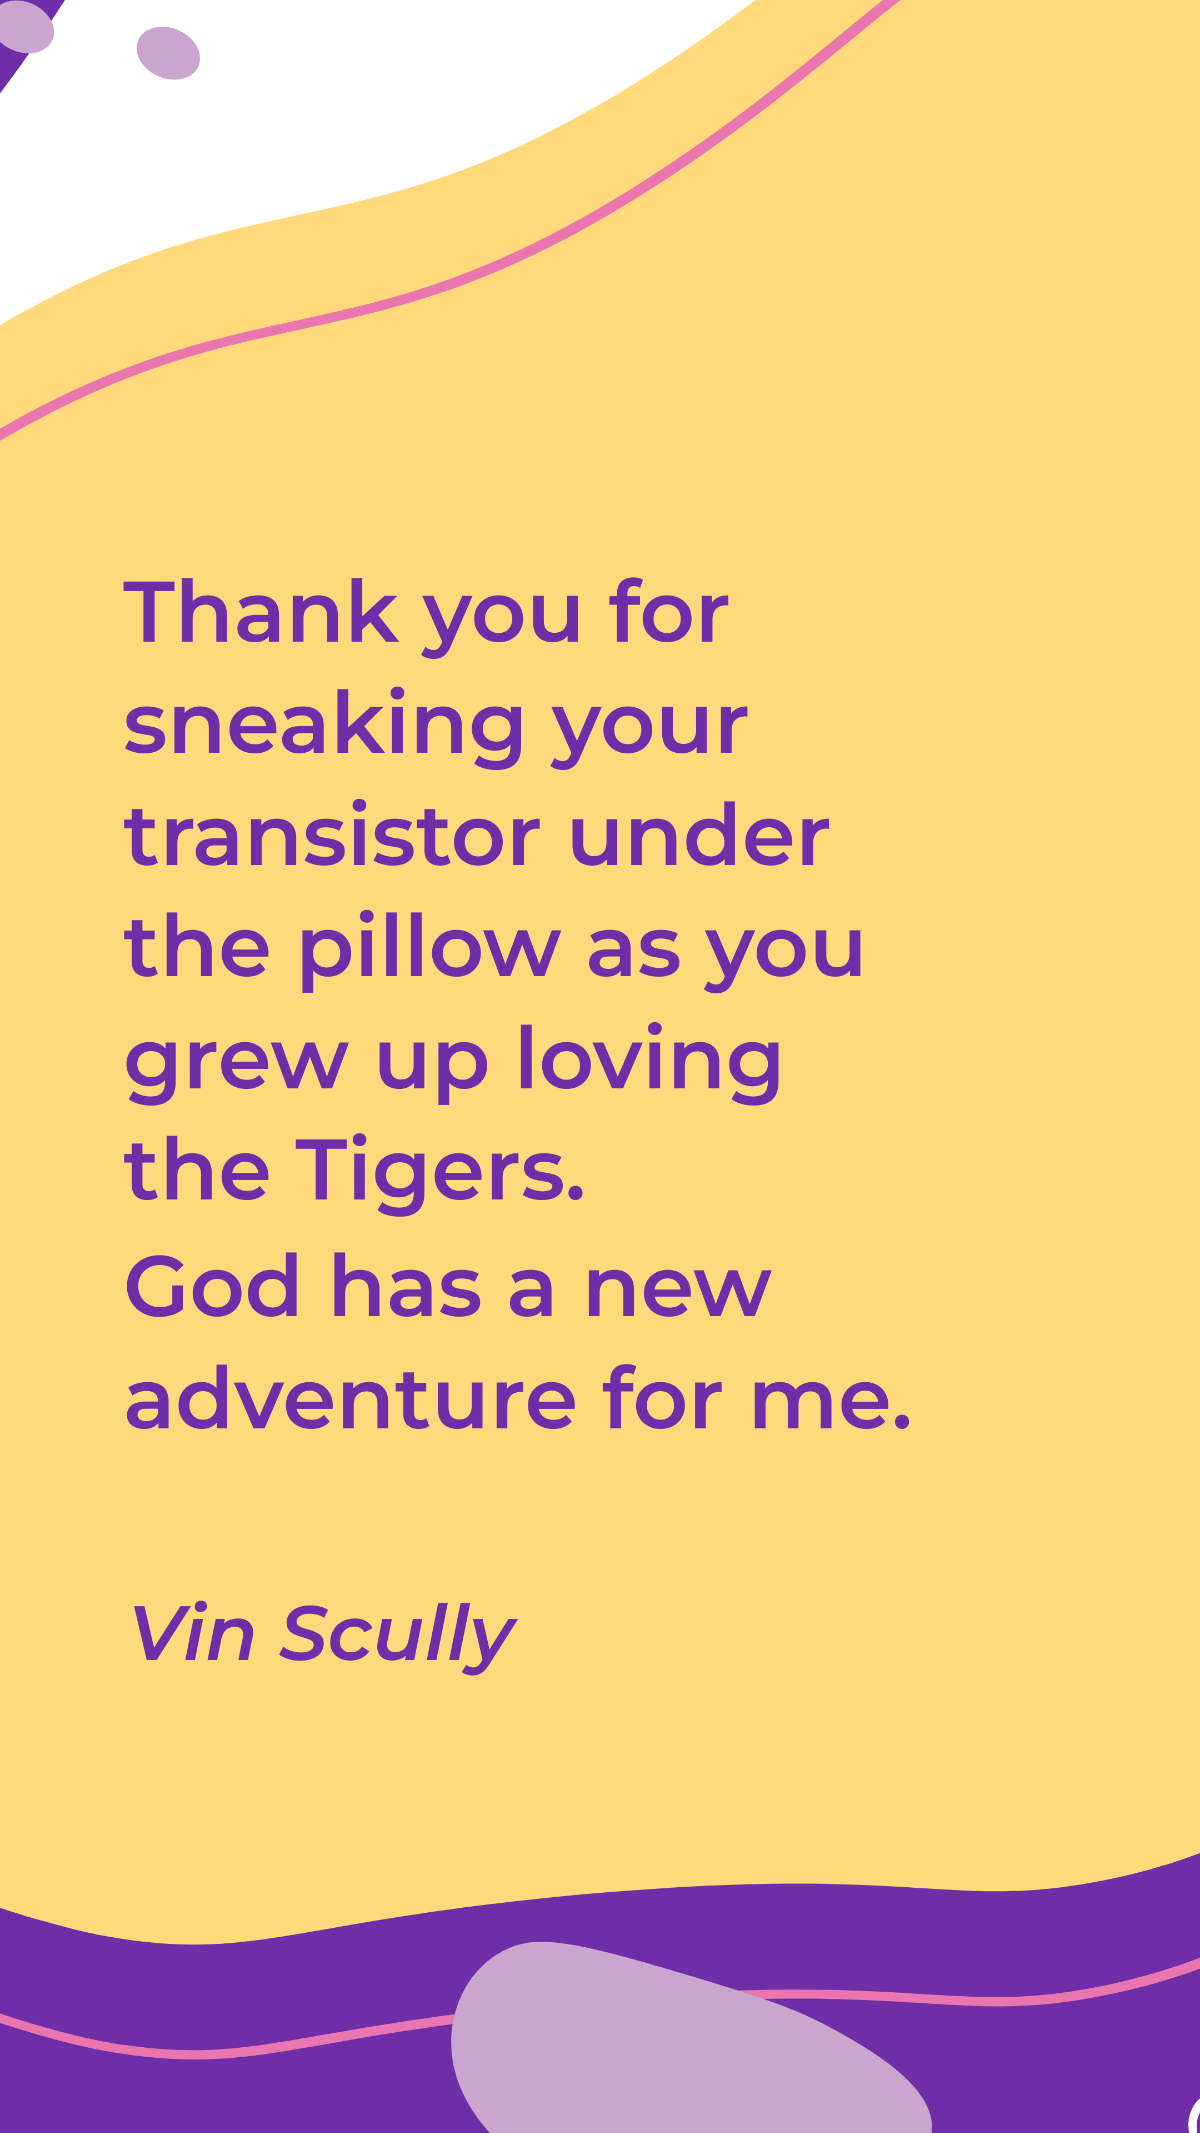 Free Vin Scully - Thank you for sneaking your transistor under the pillow as you grew up loving the Tigers. God has a new adventure for me. Template